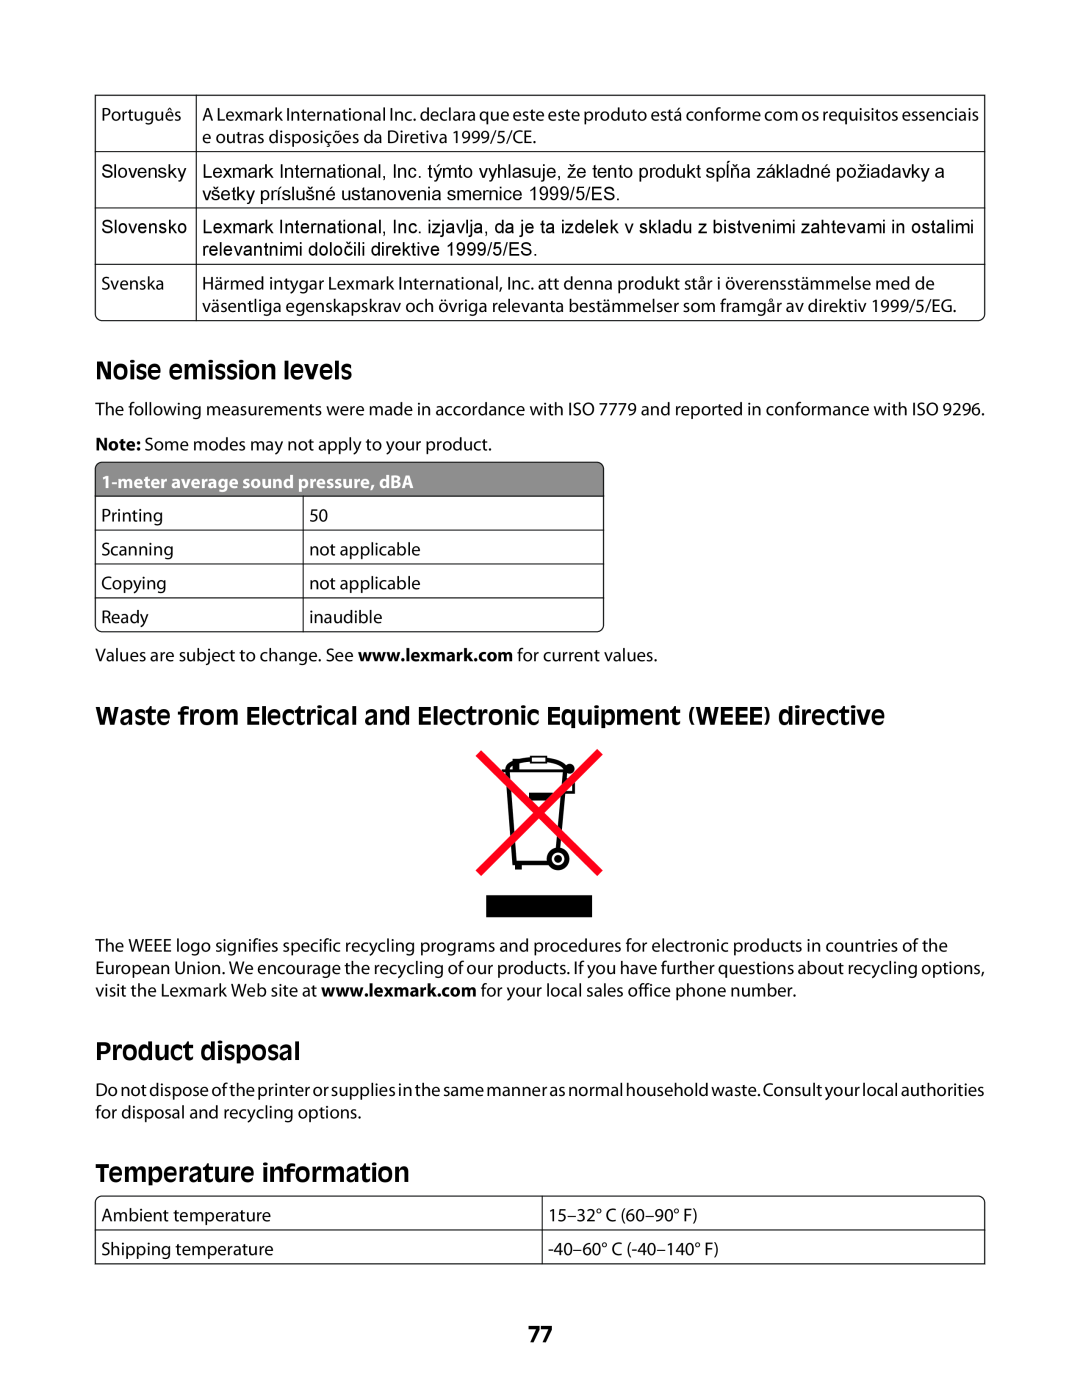 Lexmark Z2400 Series manual Noise emission levels, Waste from Electrical and Electronic Equipment WEEE directive 